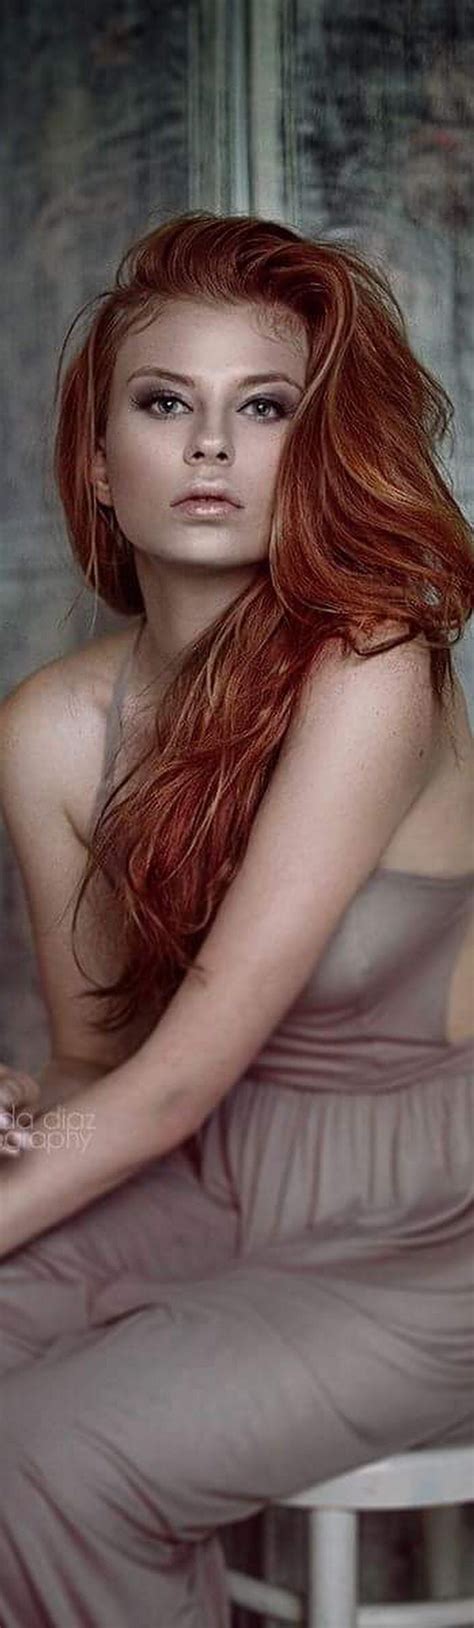 Pin By Hettiën On Red Hair Flaming Beauties Red Hair Beauty Hair